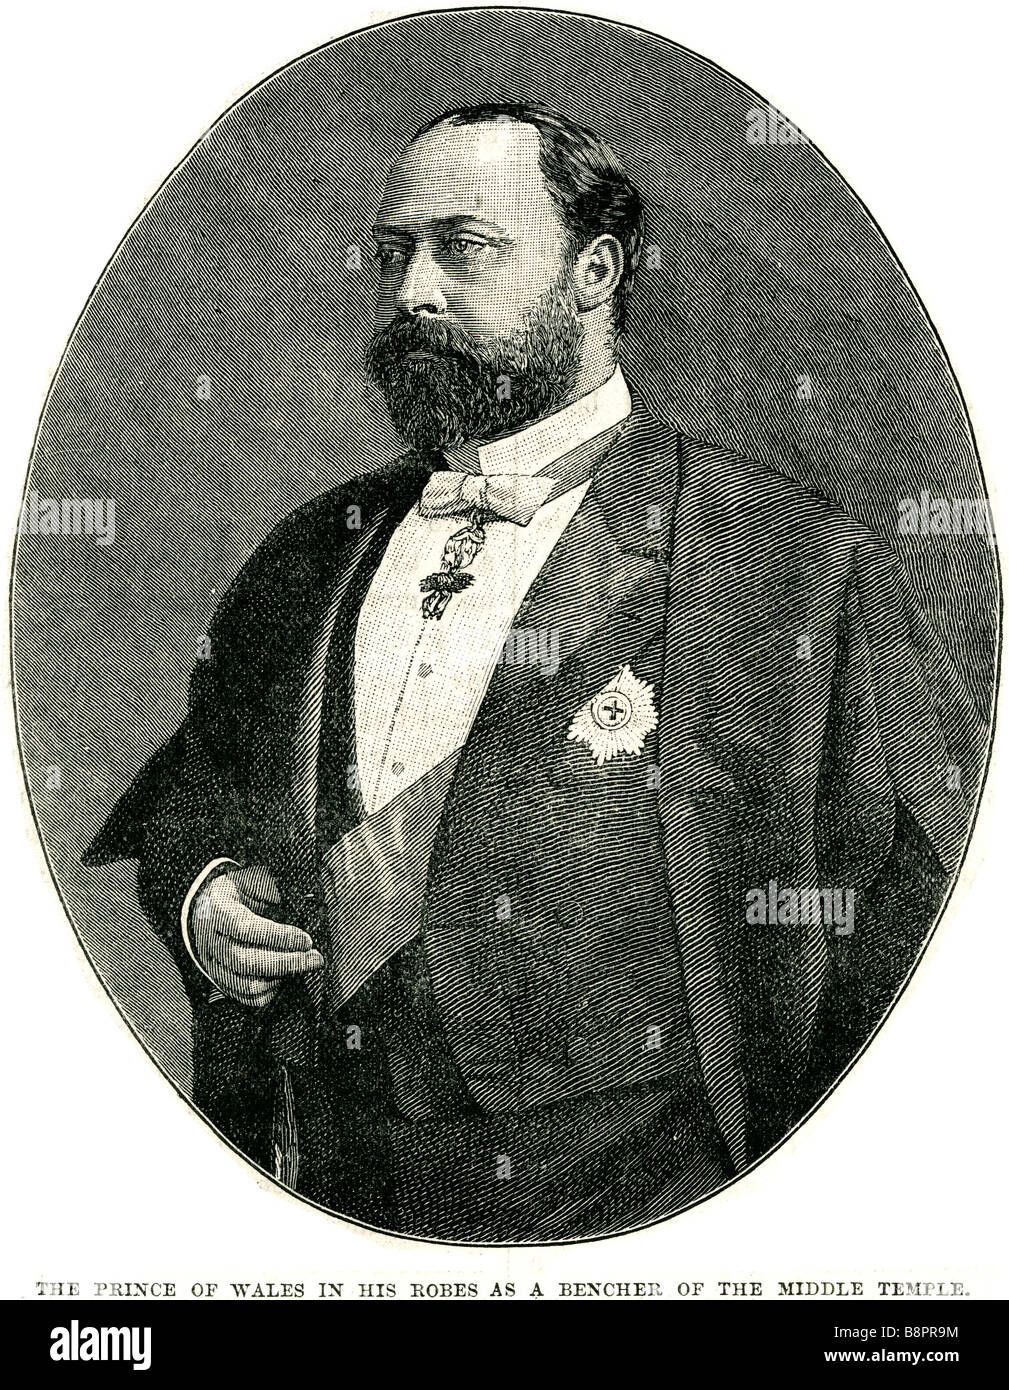 prince wales Edward VII 1841 1910 king United Kingdom British Dominions Emperor India robes bencher middle temple Stock Photo